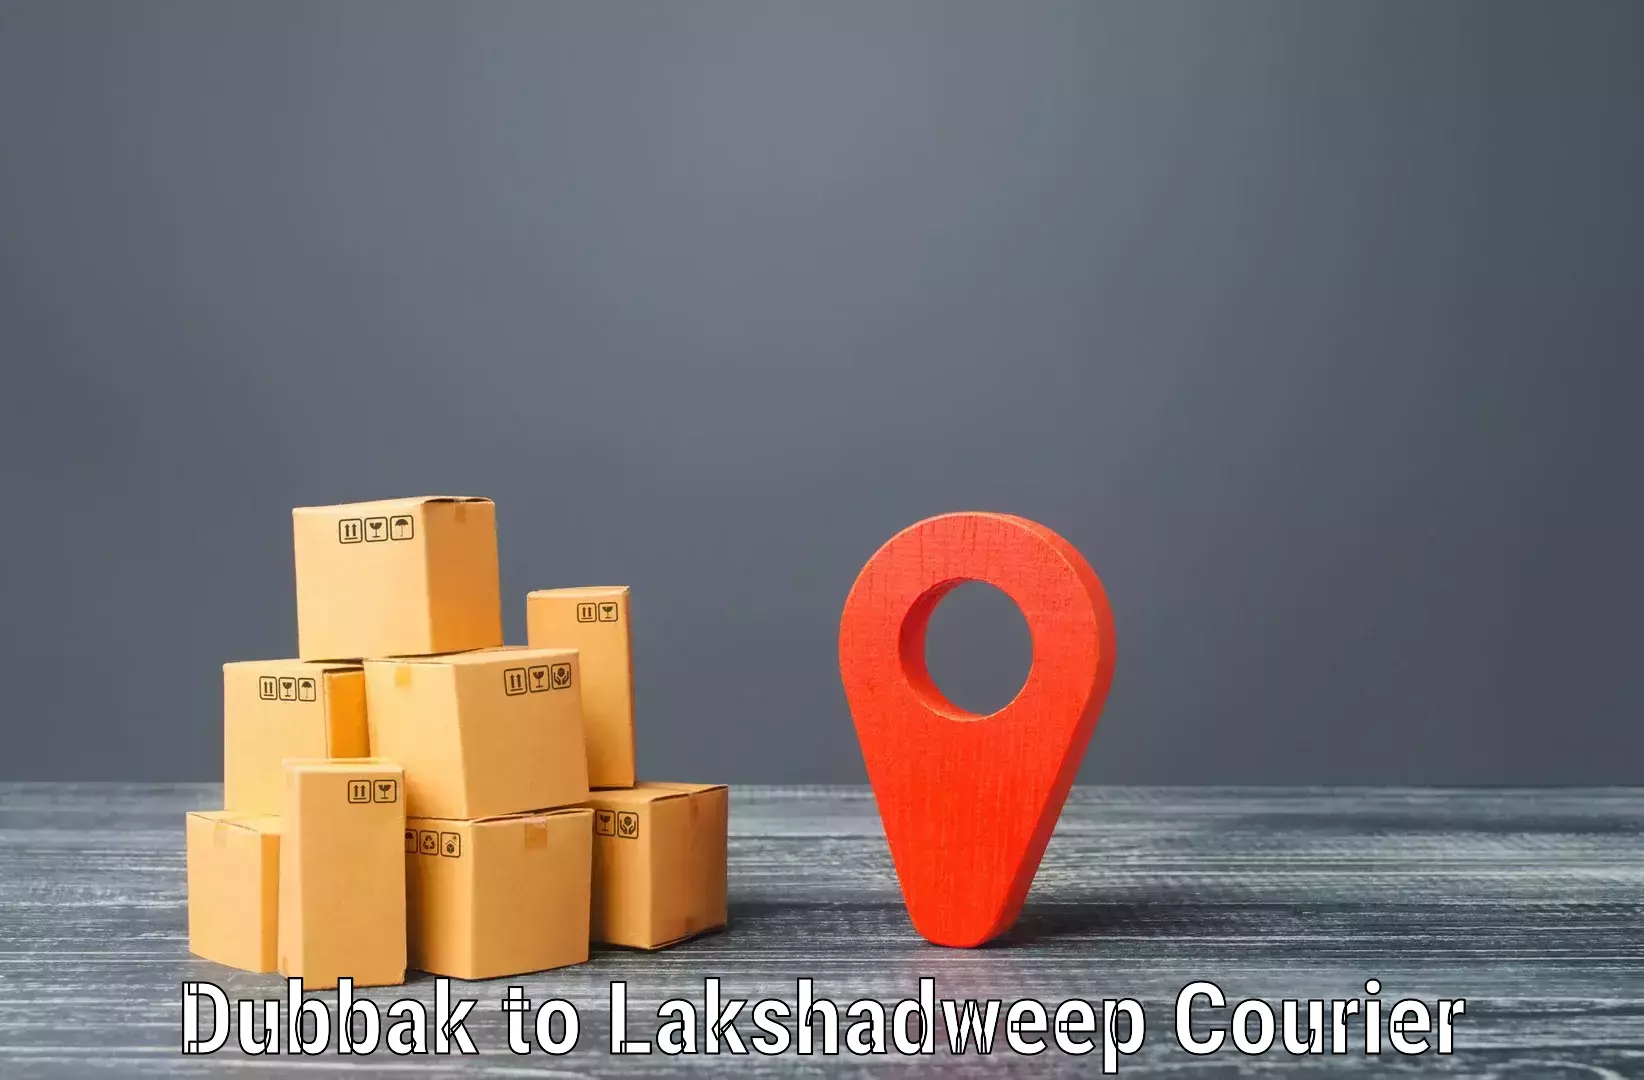 Global courier networks Dubbak to Lakshadweep